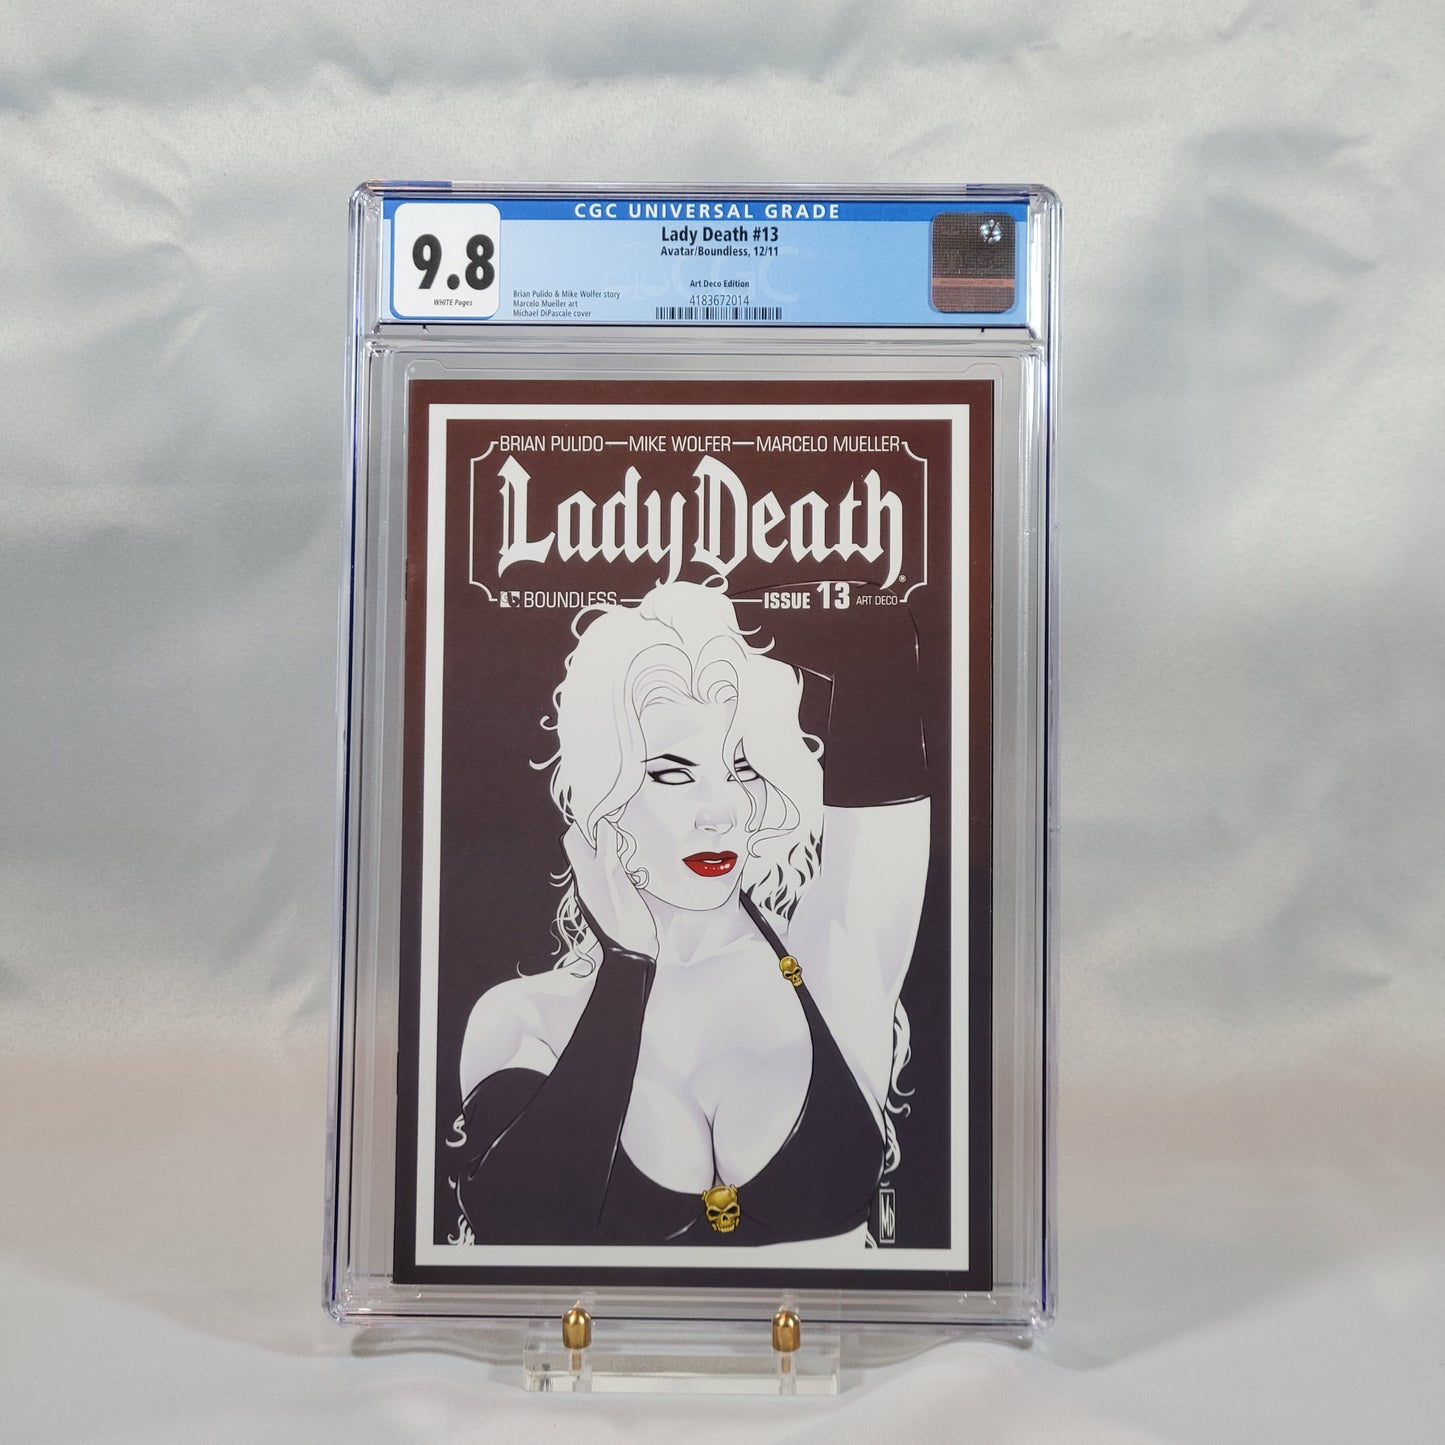 Lady Death Boundless "Art Deco" FULL RUN Collection